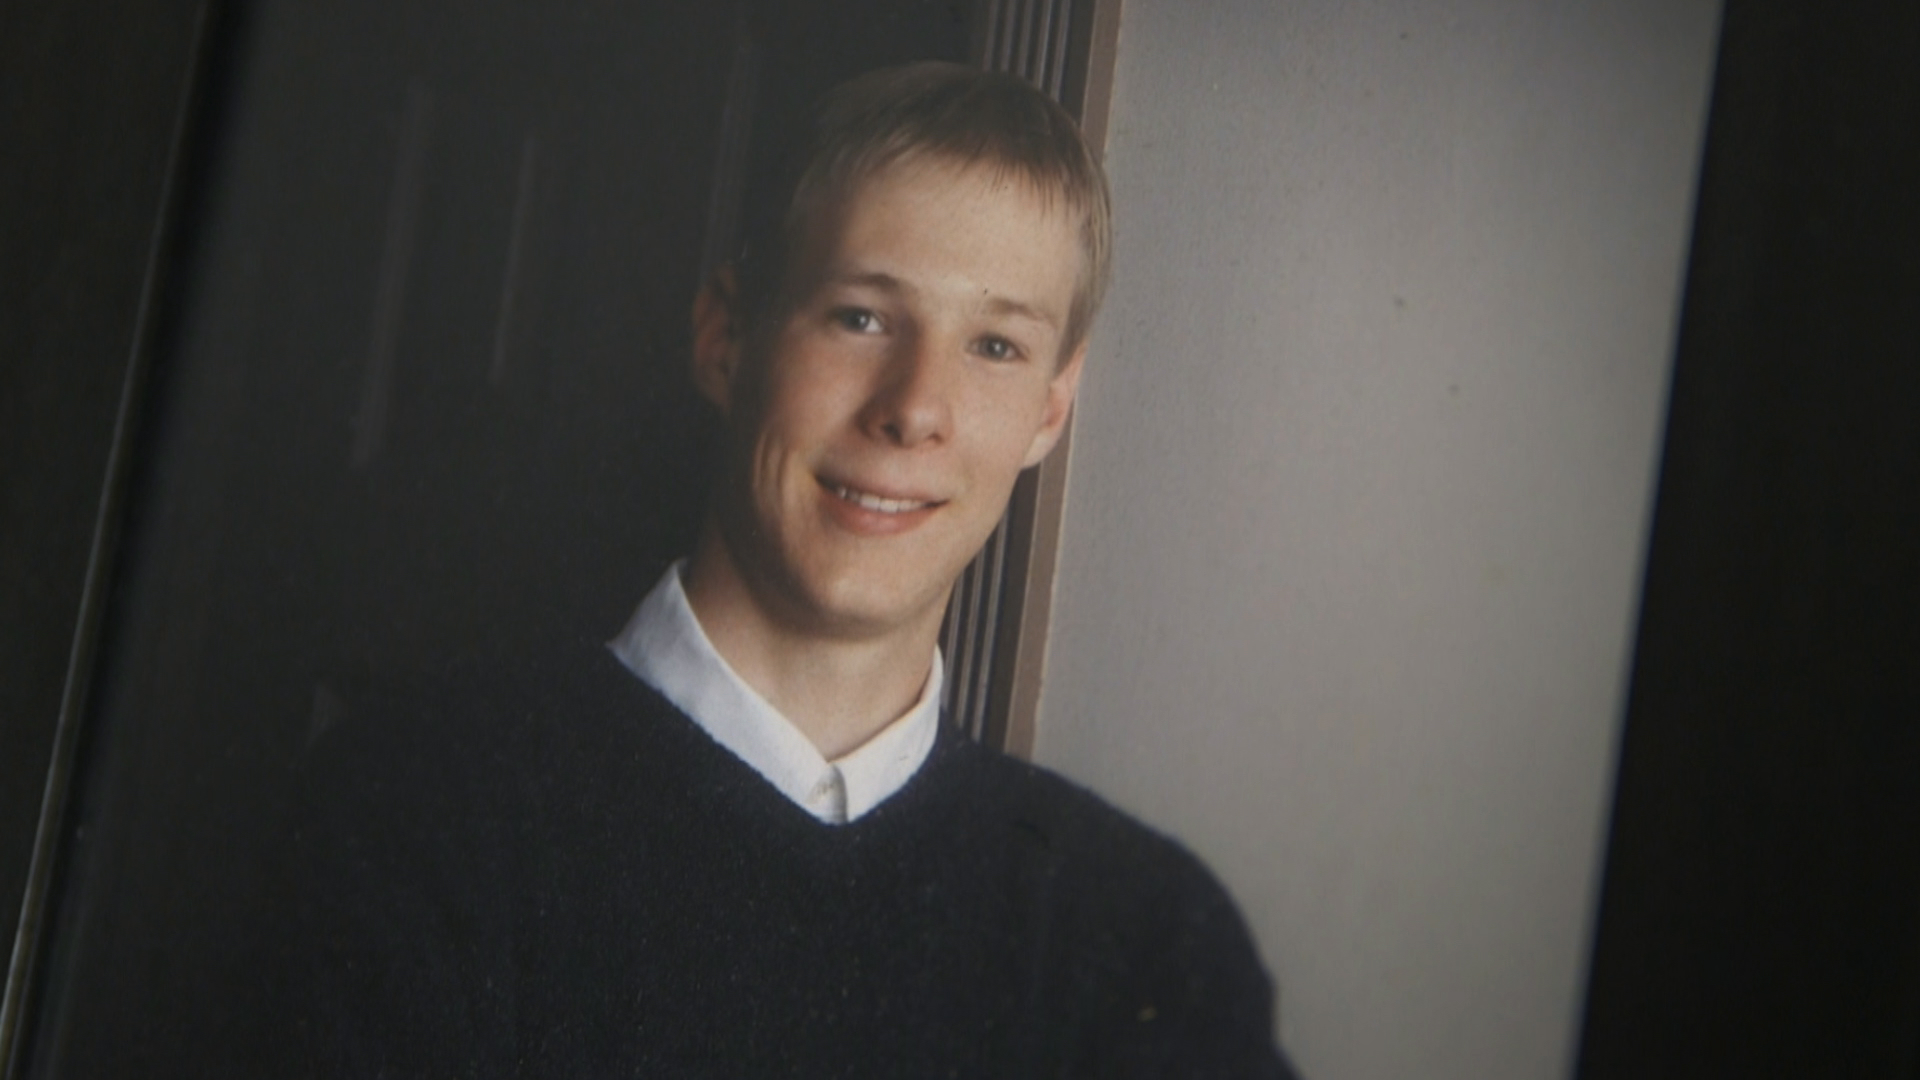 Father Of Missing St. John’s Student Josh Guimond Files Lawsuit Against Stearns County In Search For Answers